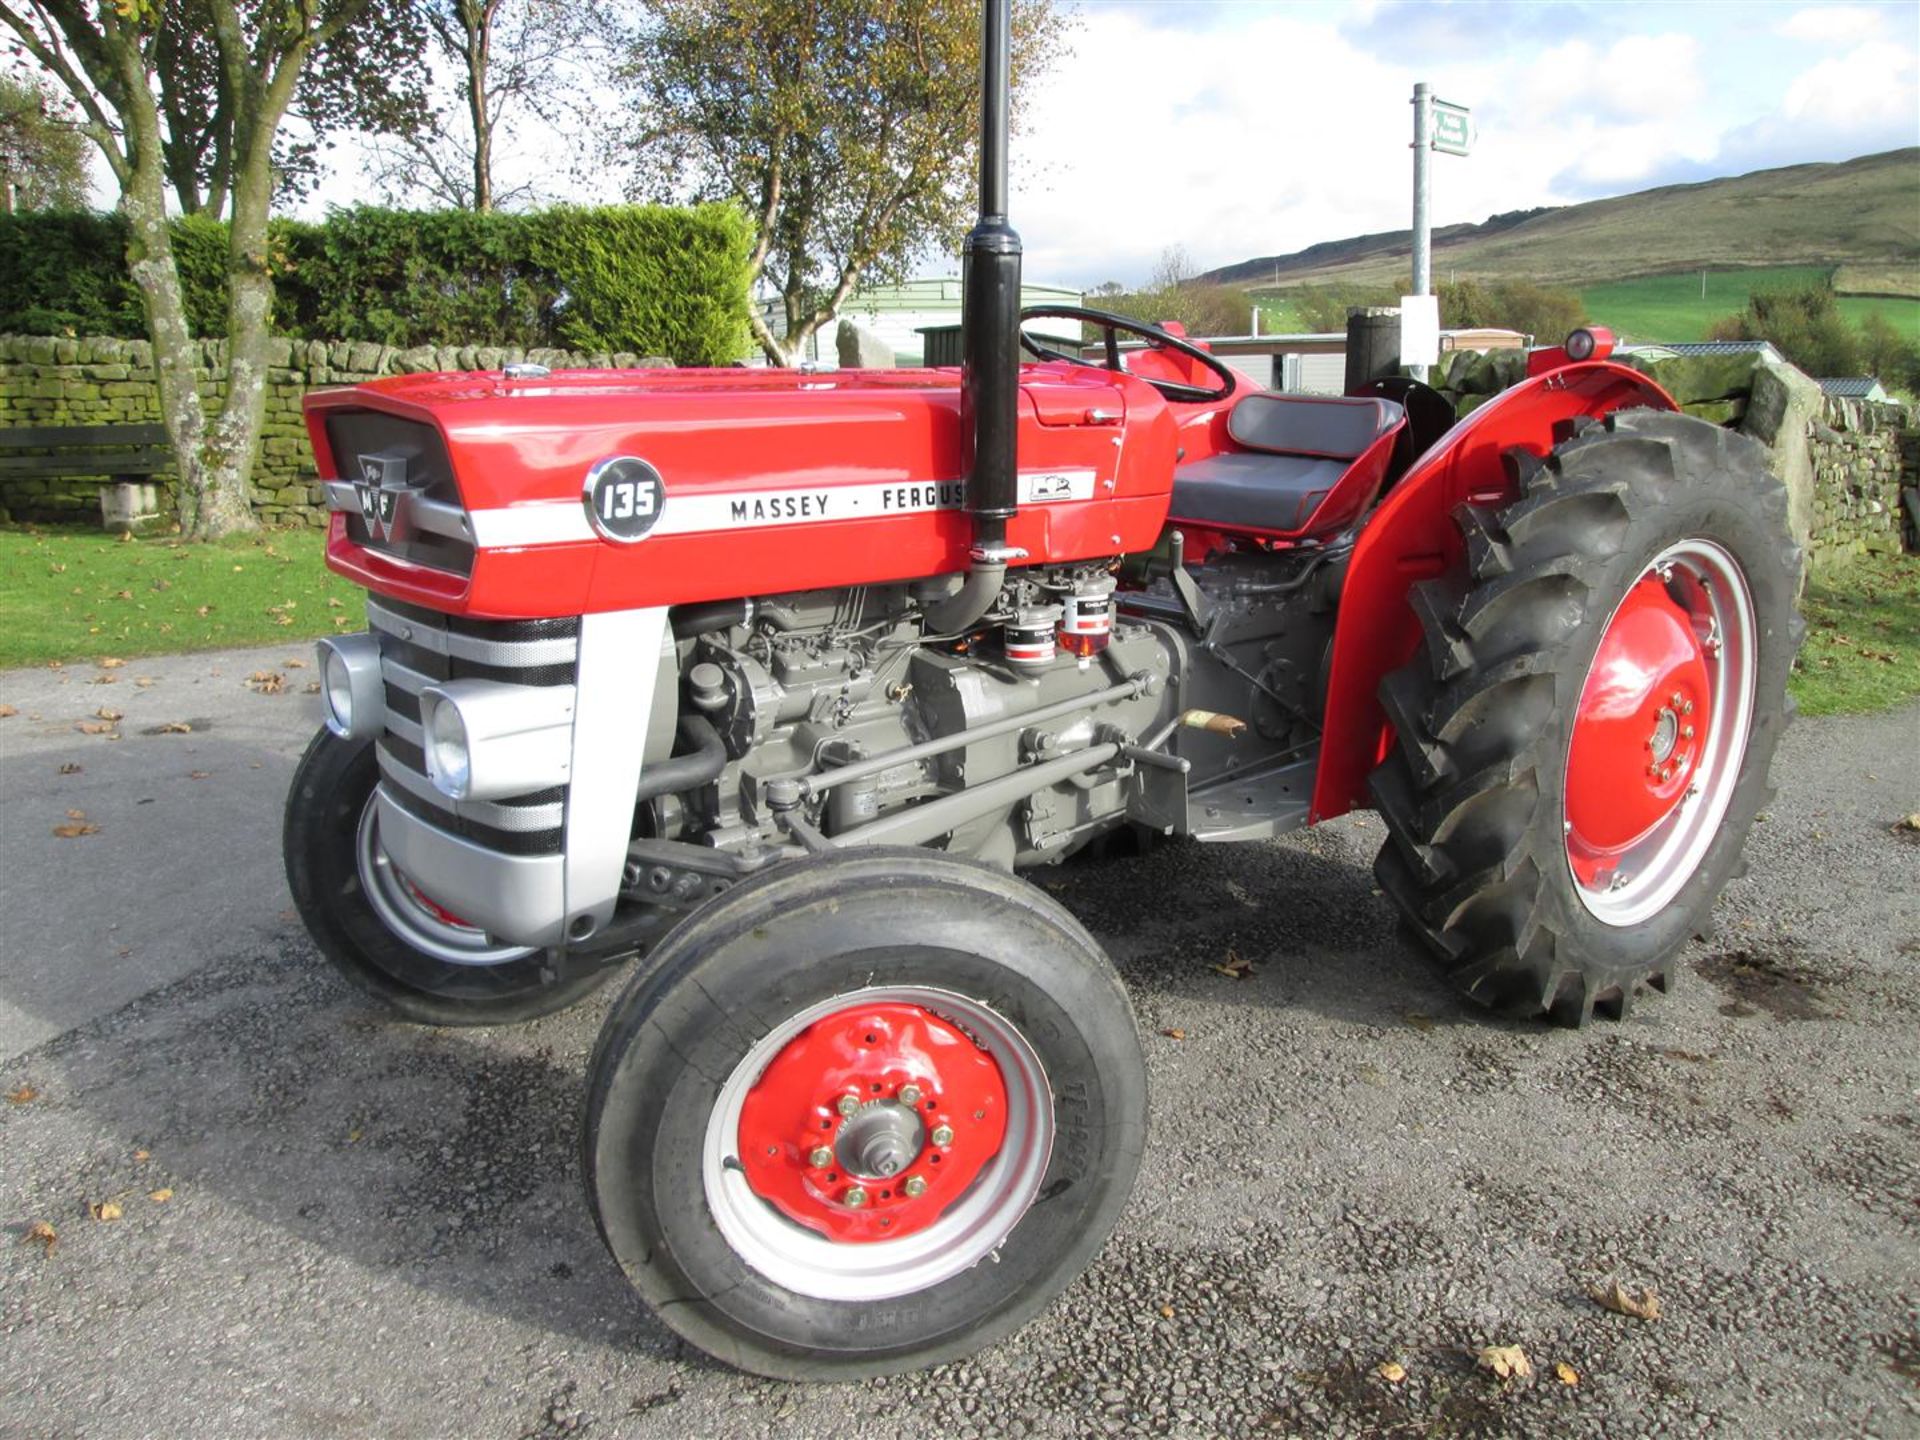 1968 MASSEY FERGUSON 135 3cylinder diesel TRACTOR Reg. No. WGU 582F Serial No. 94310 Fitted with a